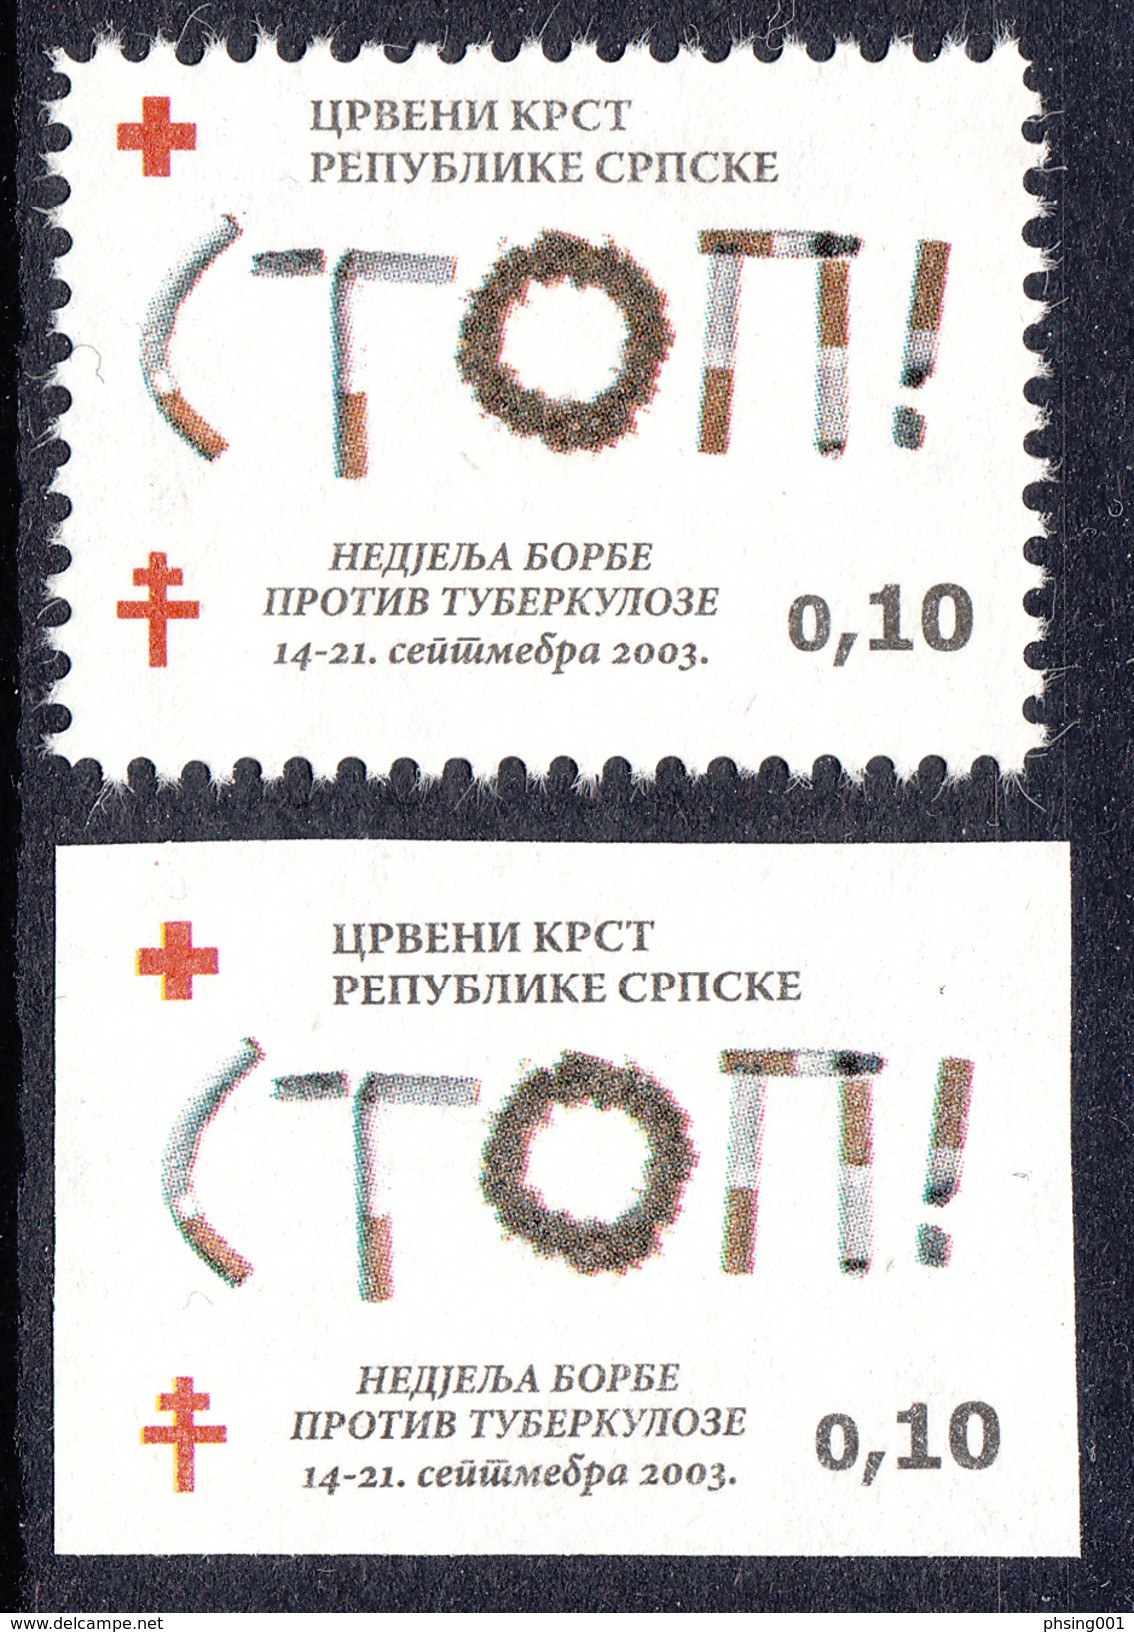 Bosnia Serbia 2003 TBC Red Cross Rotes Kreuz Croix Rouge, Tax Charity Surcharge Perforated + Imperforated Stamp MNH - Bosnien-Herzegowina